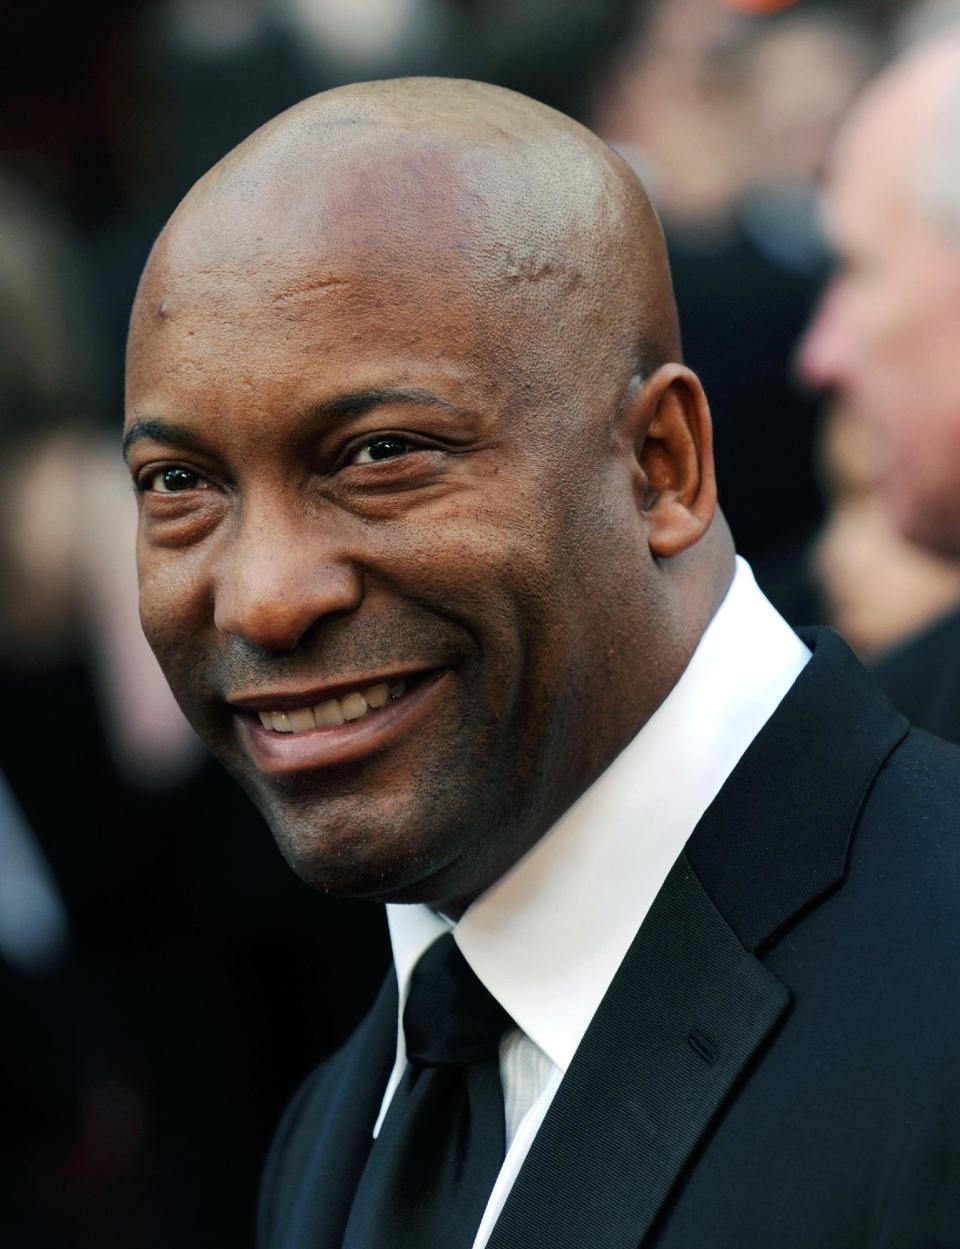 FILE - In this file photo taken Feb. 24, 2008, director John Singleton arrives for the annual Academy Awards in Los Angeles. Singleton and Paramount Pictures on Nov. 1, 2012 settled a lawsuit filed by the director/producer that claimed the studio reneged on a contract to allow his company to produce two additional films after the release of 2005's "Hustle & Flow," which received two Oscar nominations. (AP Photo/Chris Pizzello, File)